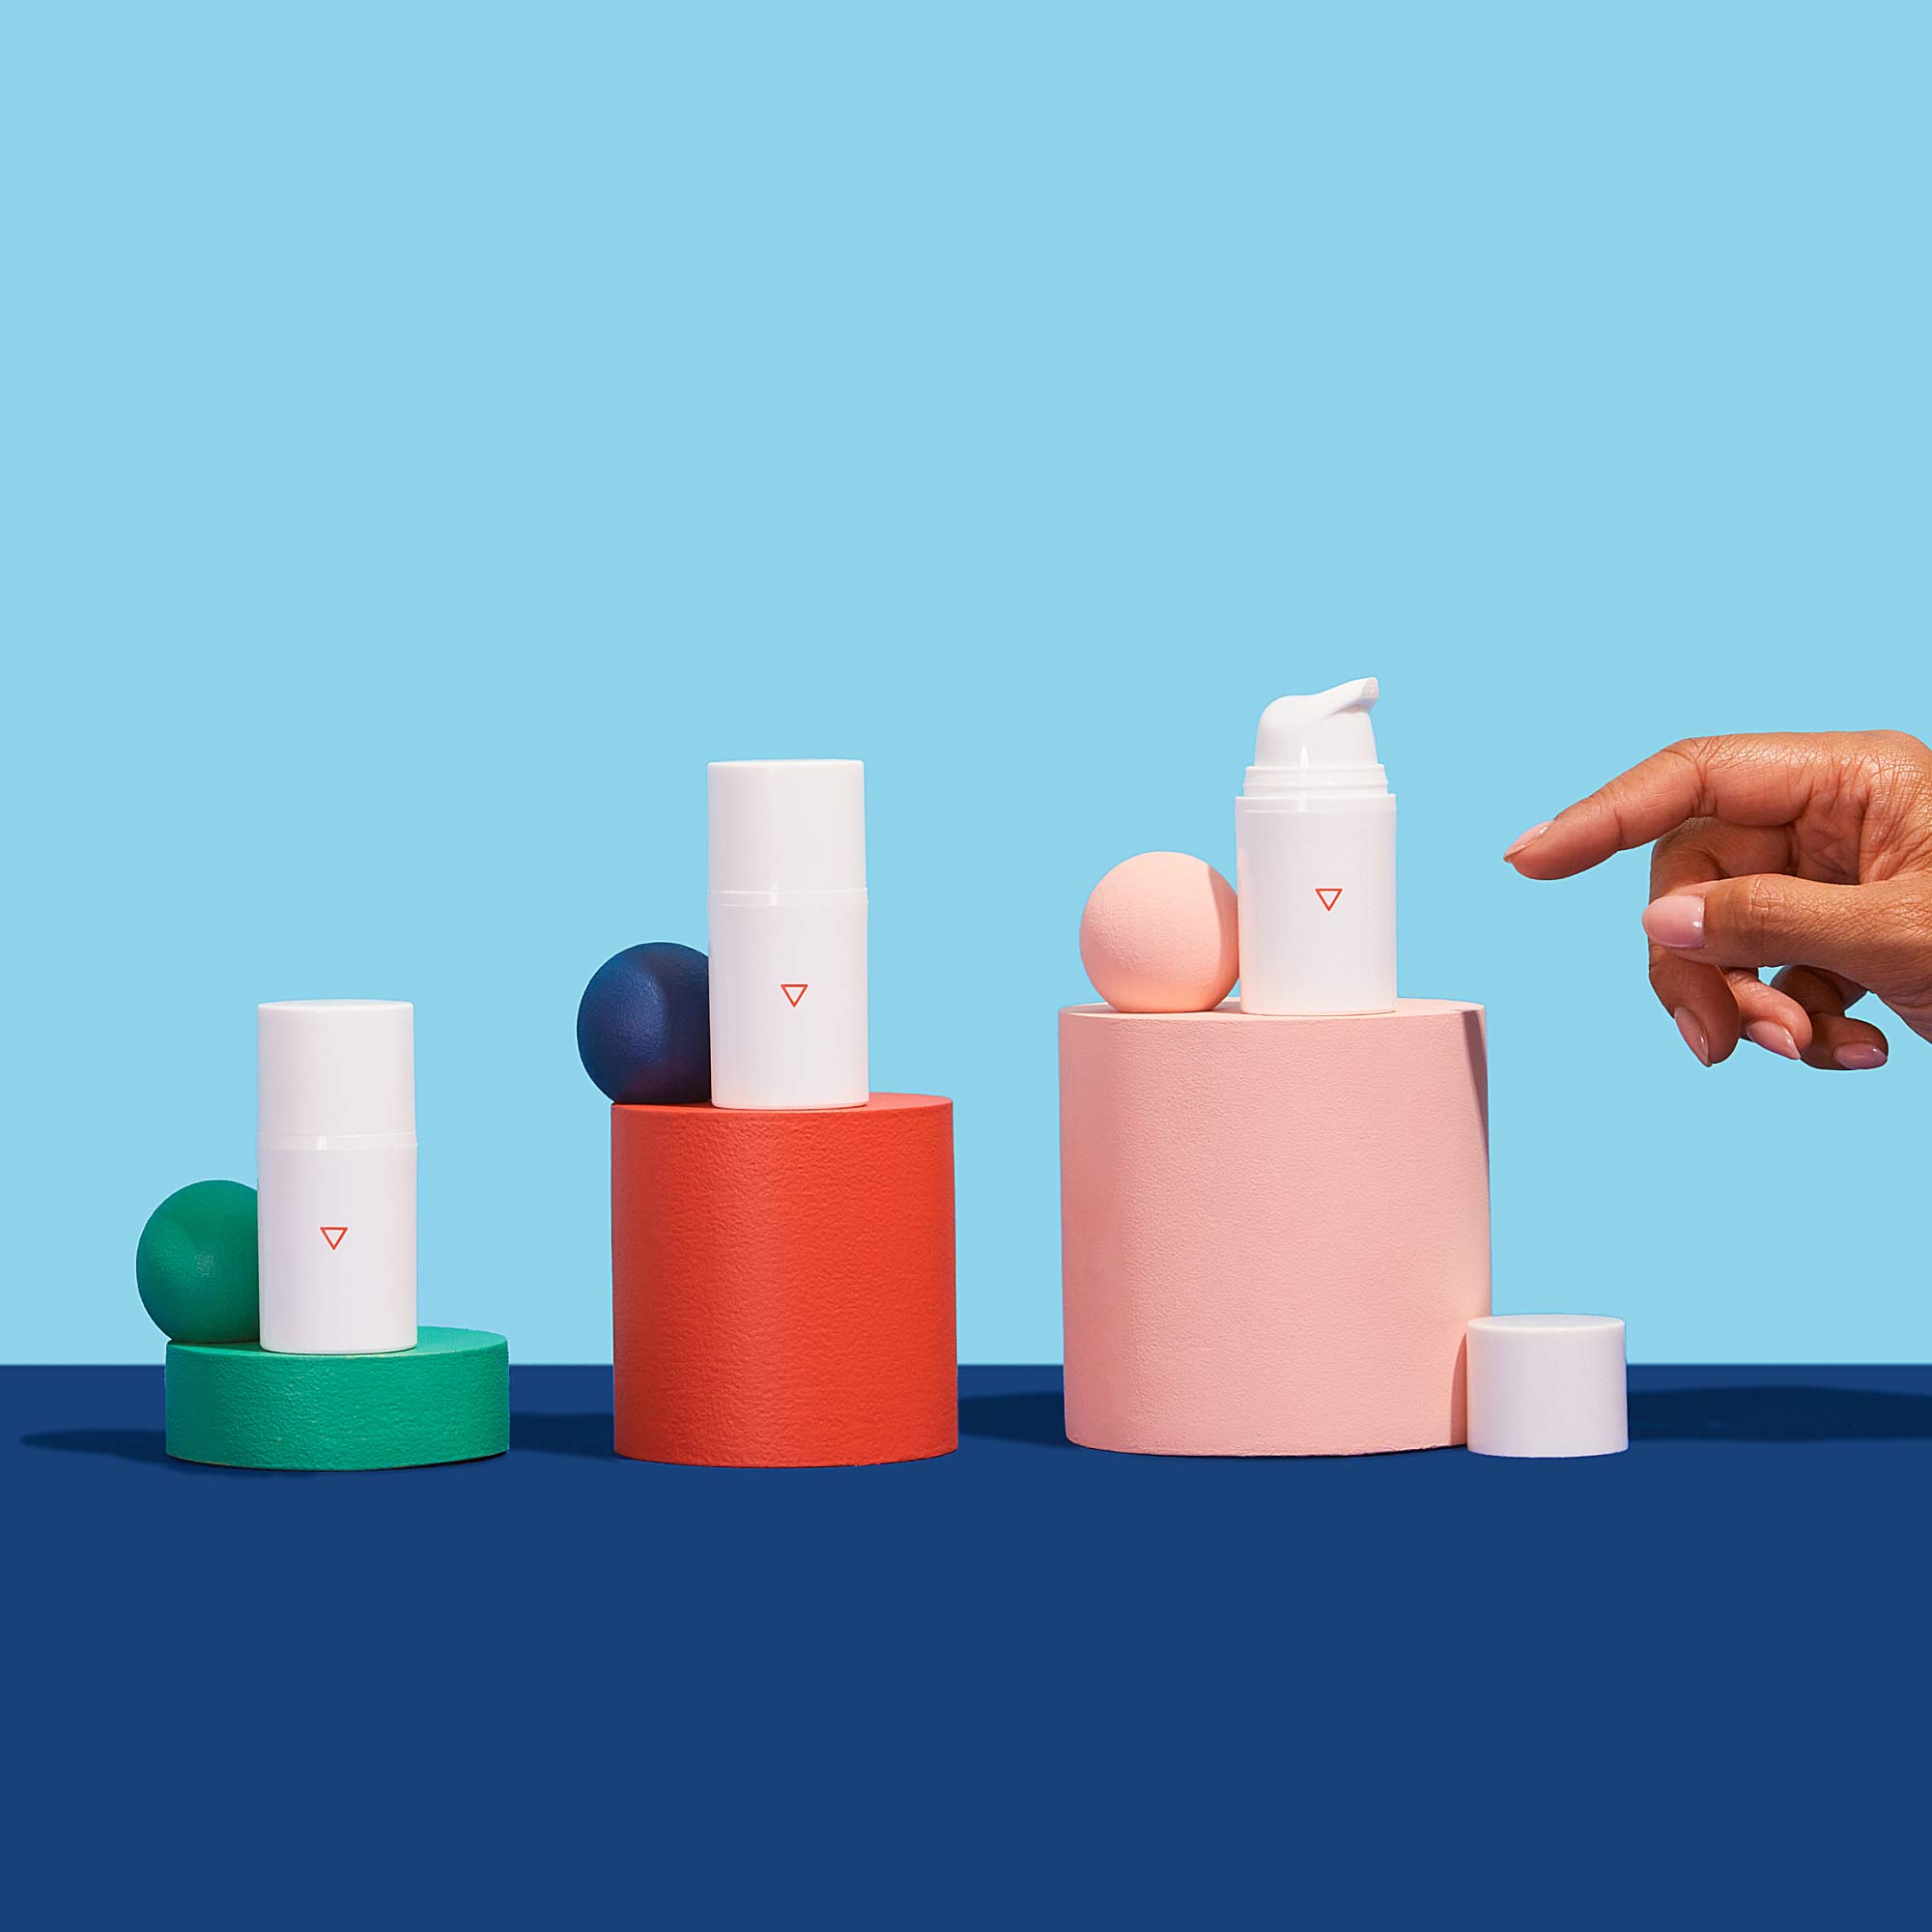 A woman's hand reaching for 3 bottles of Wisp Hydrocortisone Cream balancing on colorful abstract shapes on a blue surface